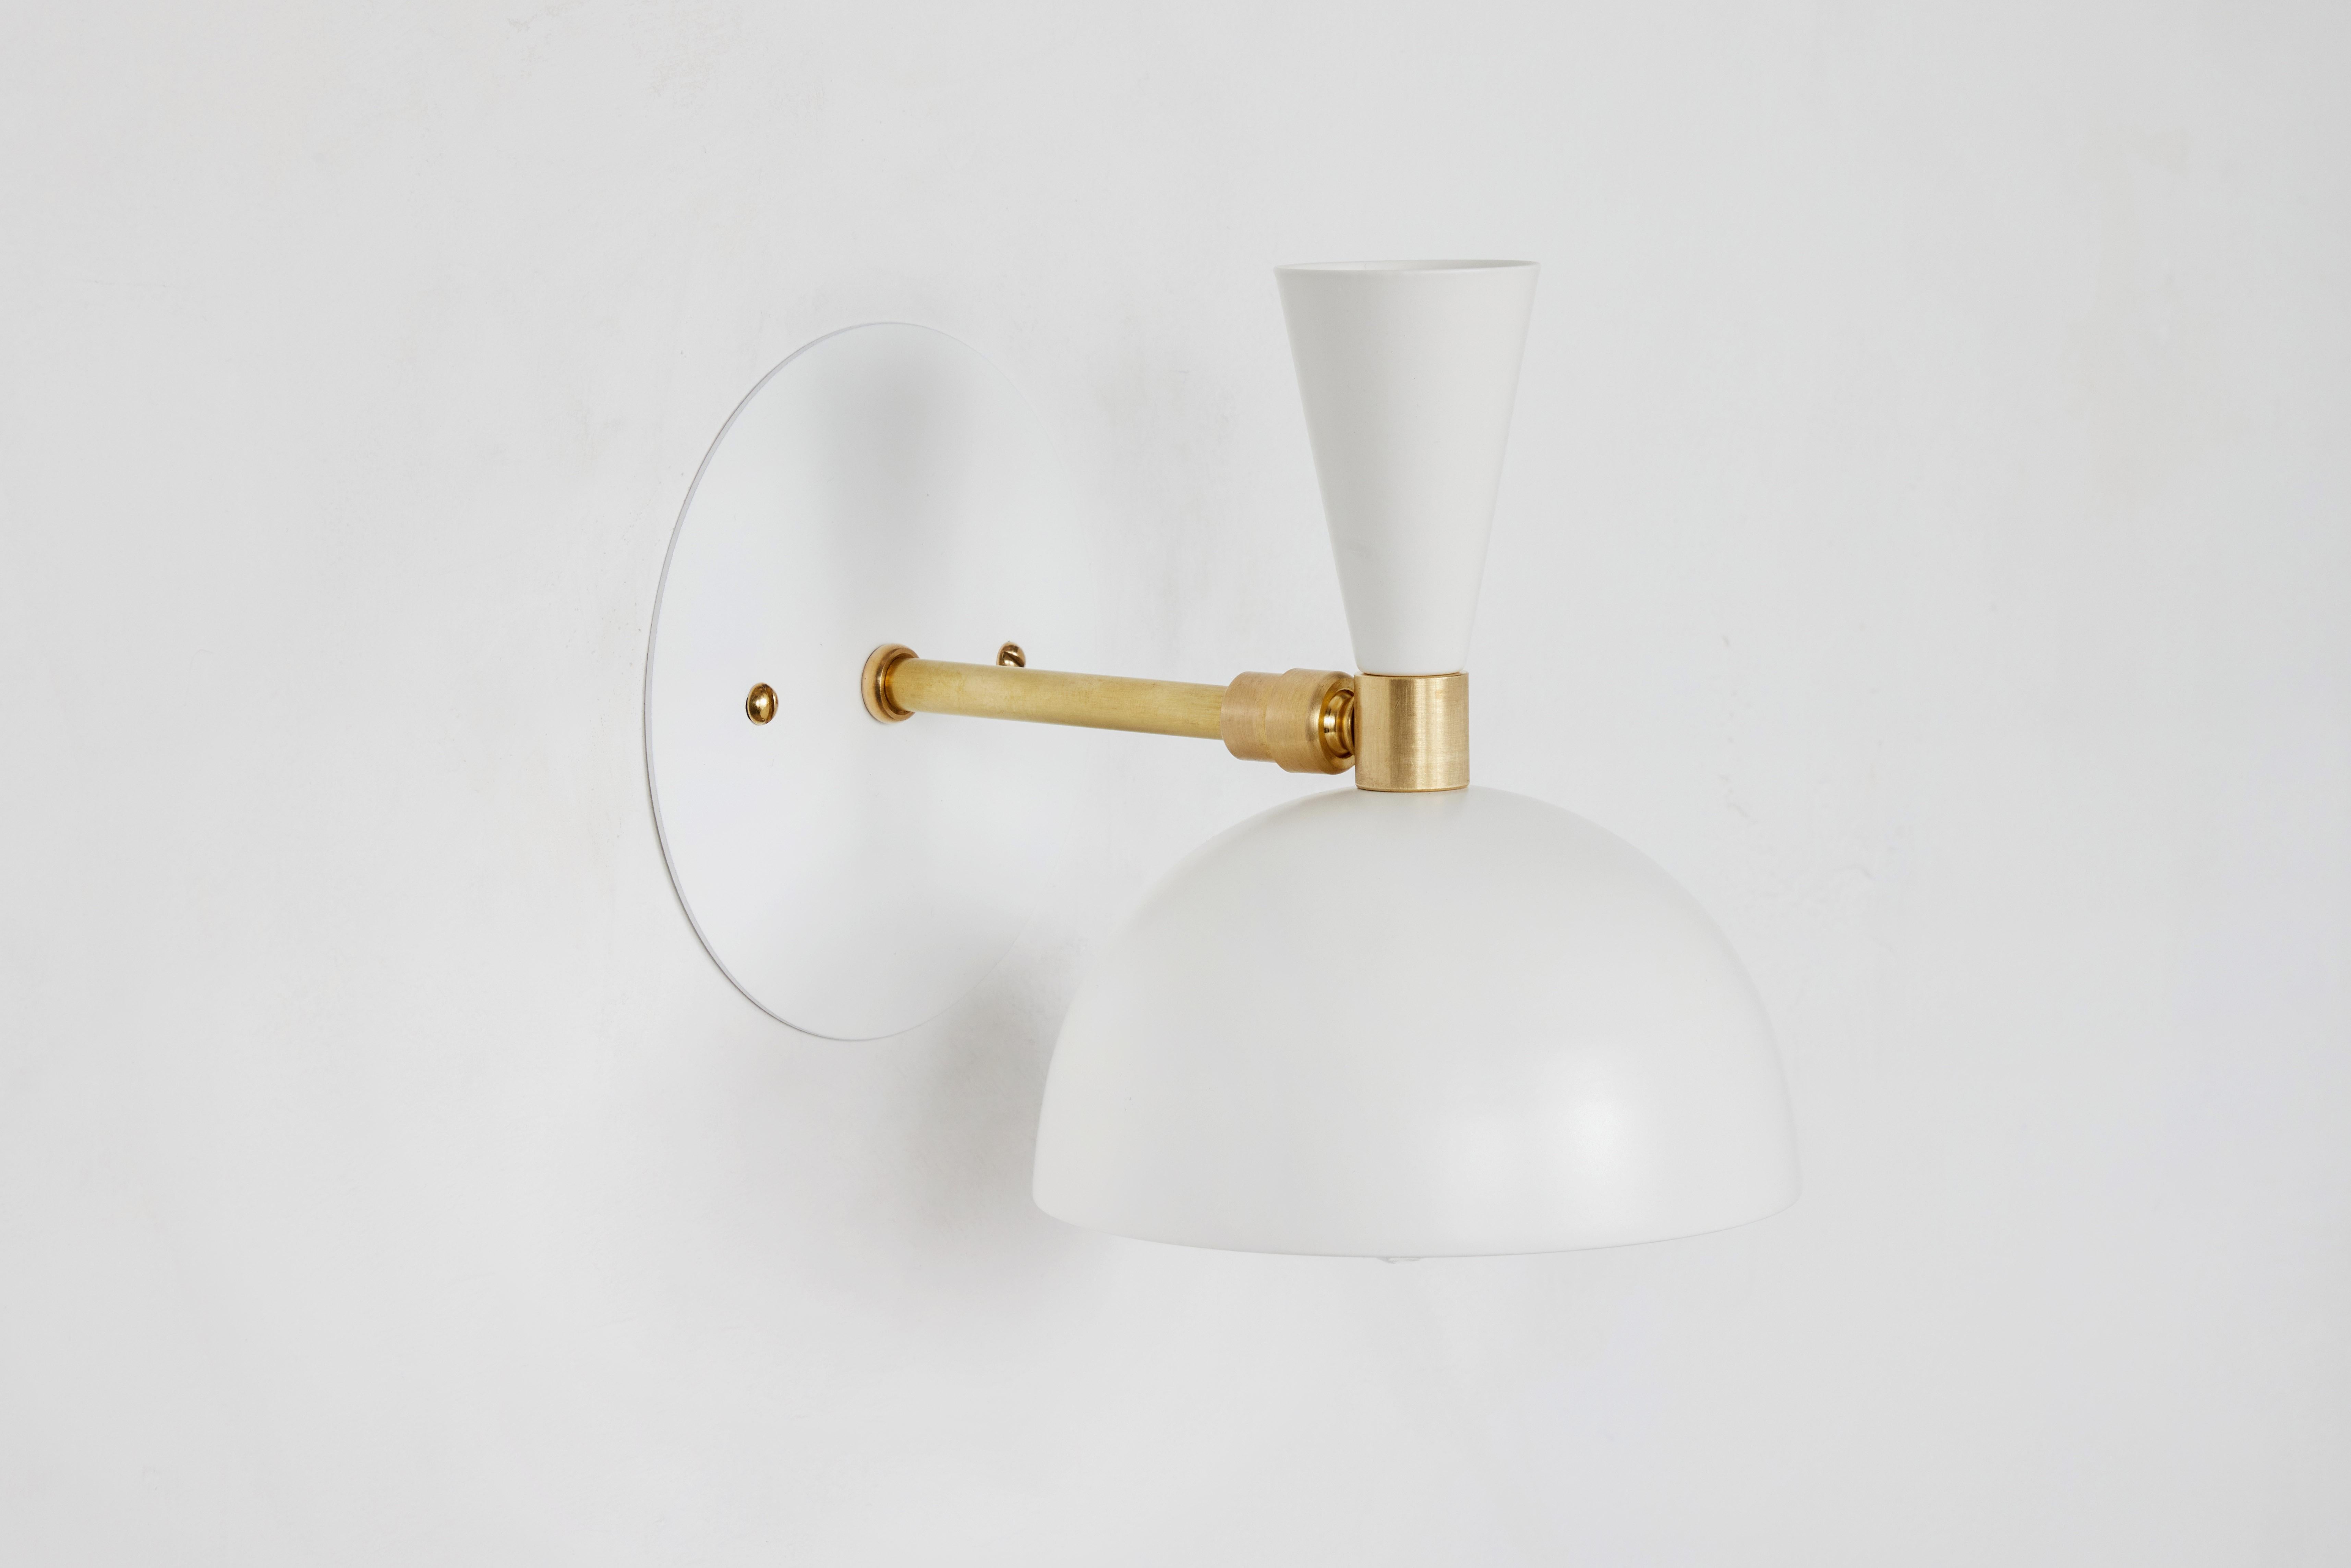 Pair of 'Lola' brass and metal adjustable sconces in white. Hand-fabricated by Los Angeles based designer and lighting professional Alvaro Benitez, these highly refined sconces are reminiscent of the iconic midcentury Italian designs of Arteluce and